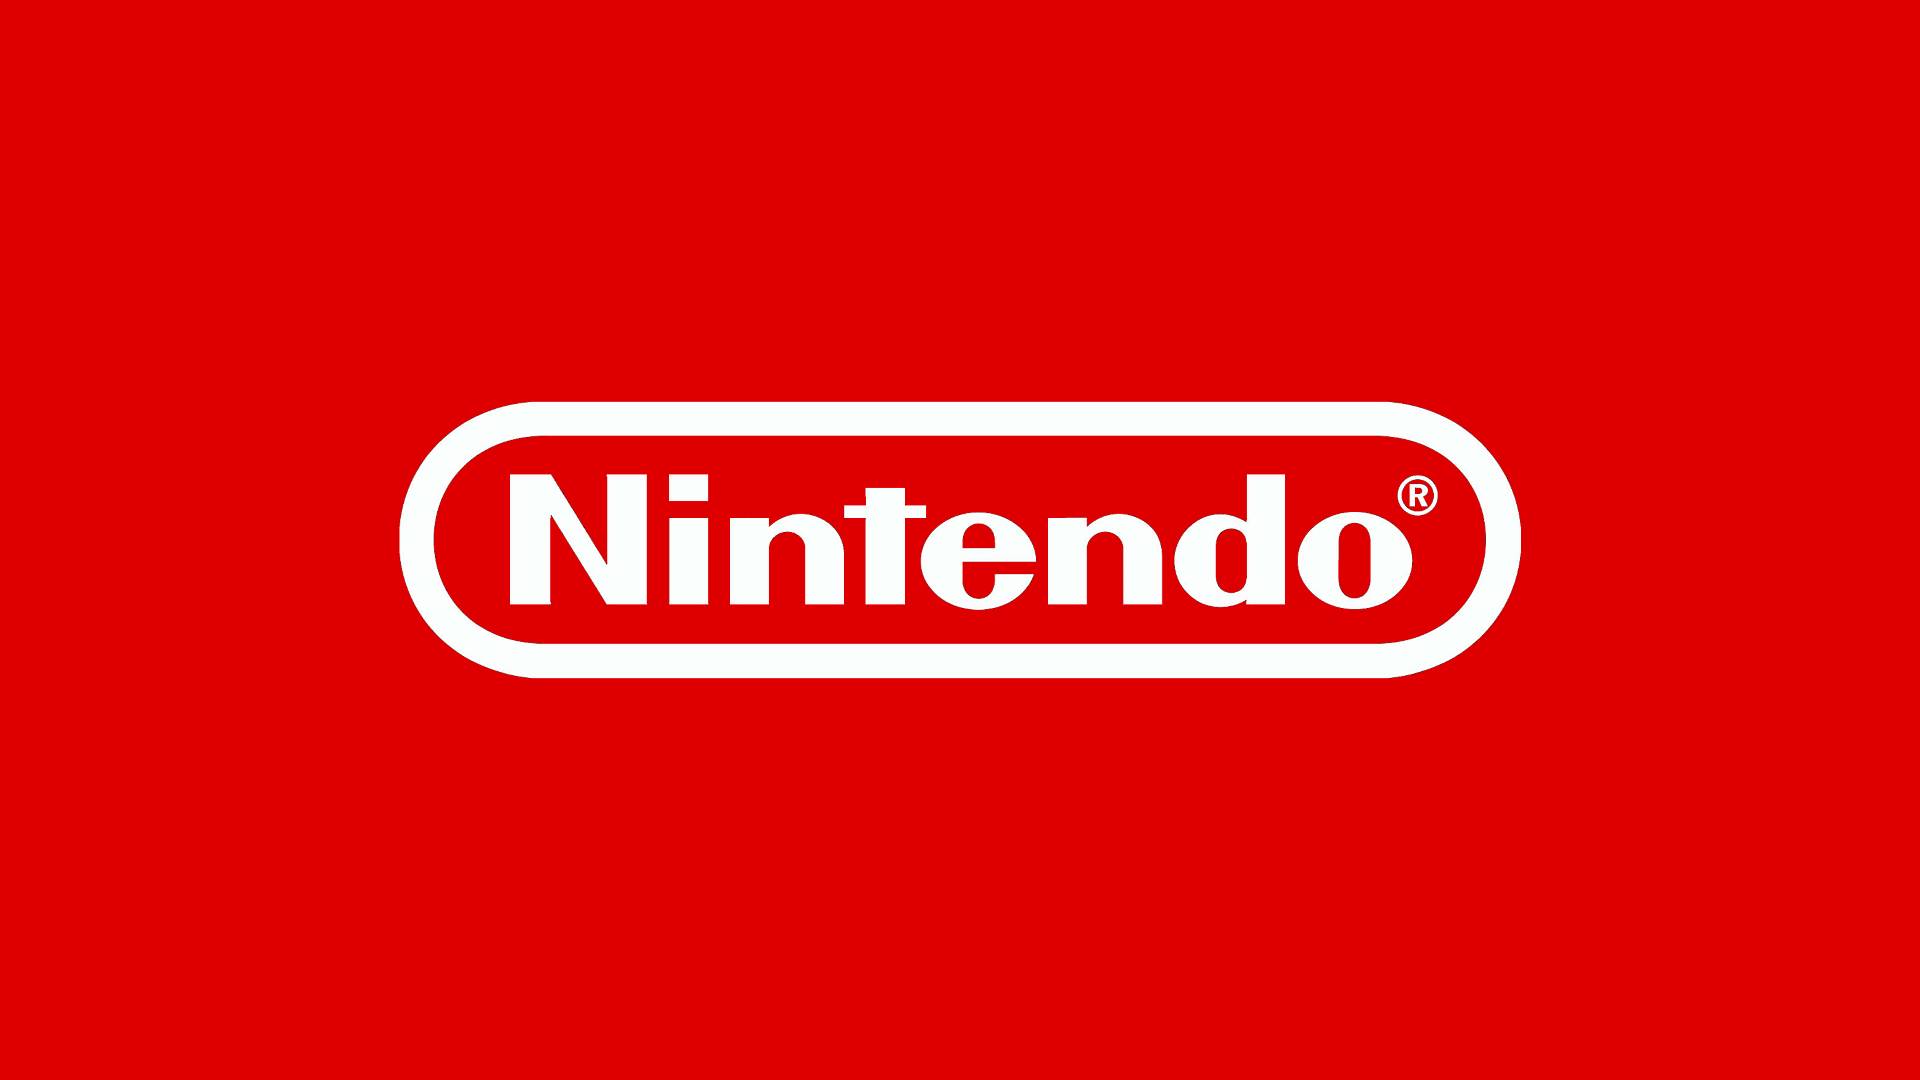 Nintendo Eshop Sale is coming to Europe this Thursday